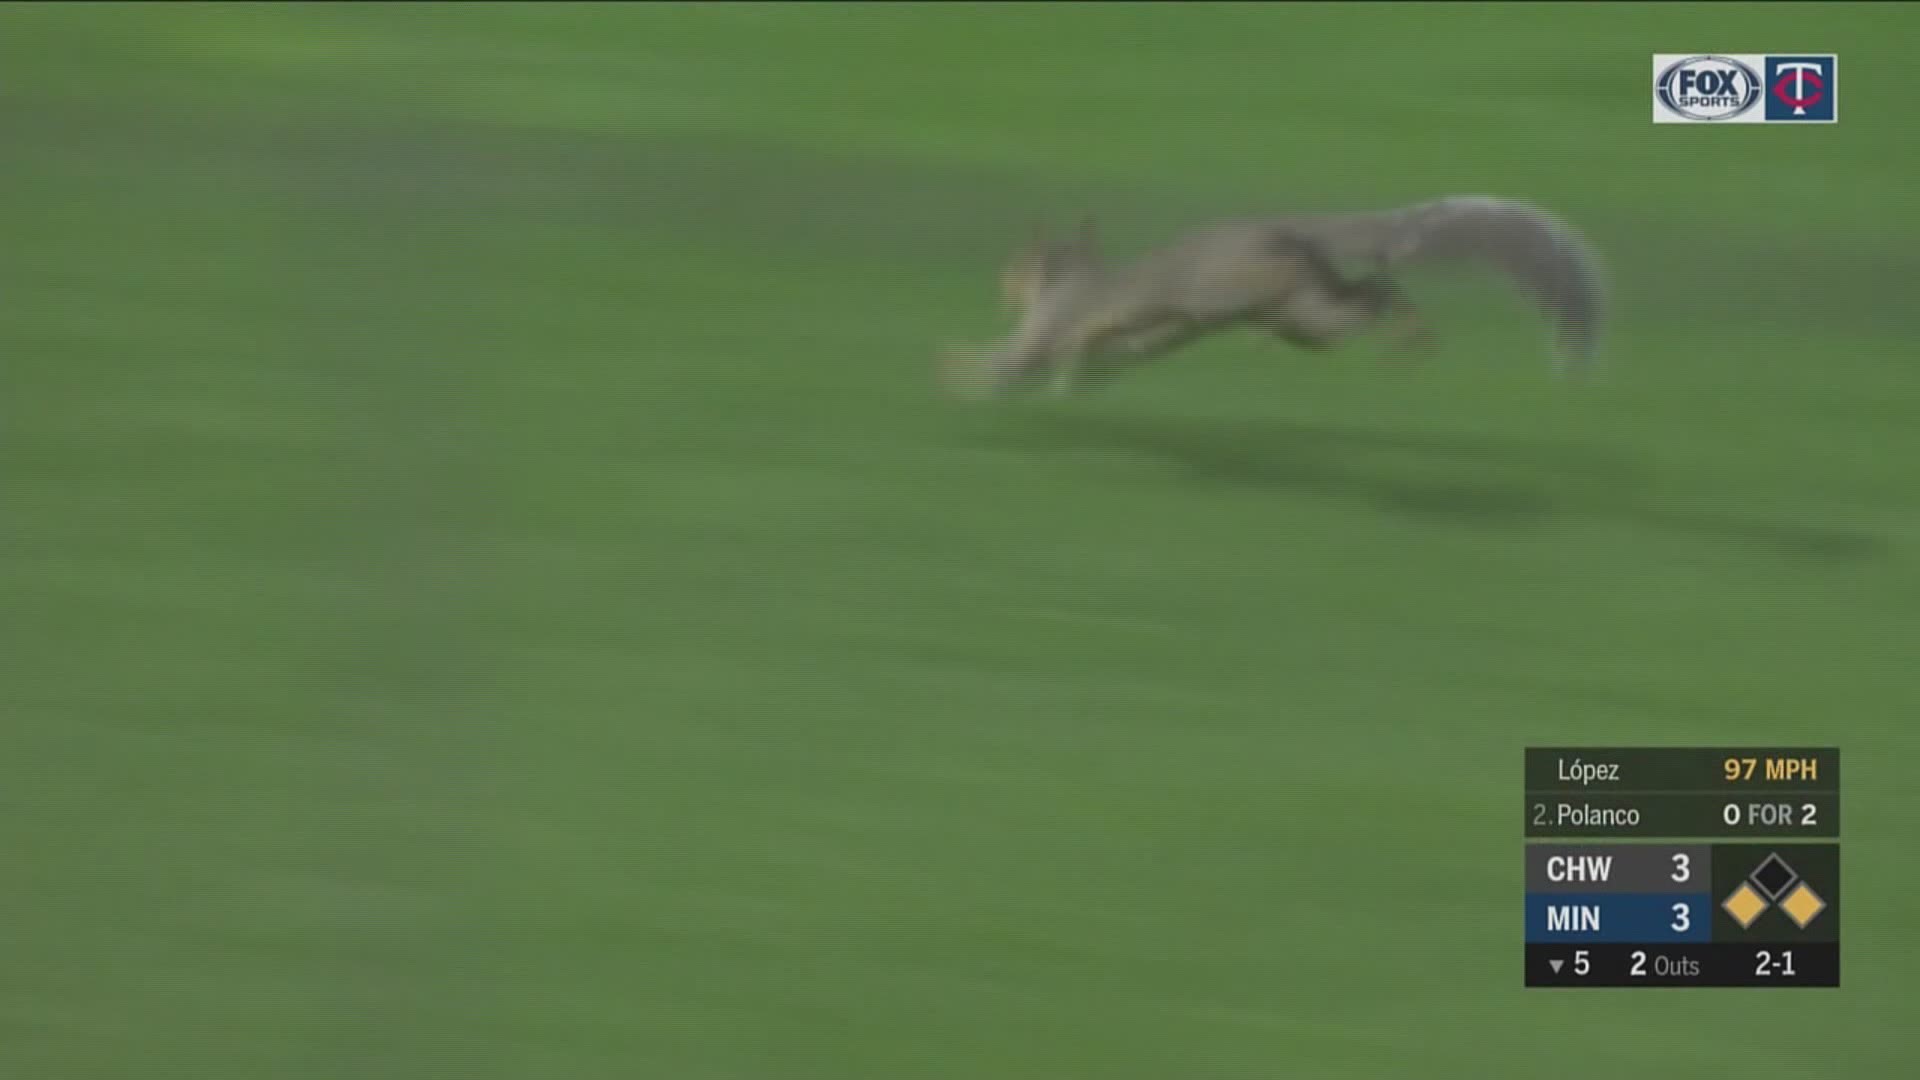 On Tuesday night at Target Field, a squirrel darted between the legs of Twins outfielder Max Kepler and into the hearts of fans.